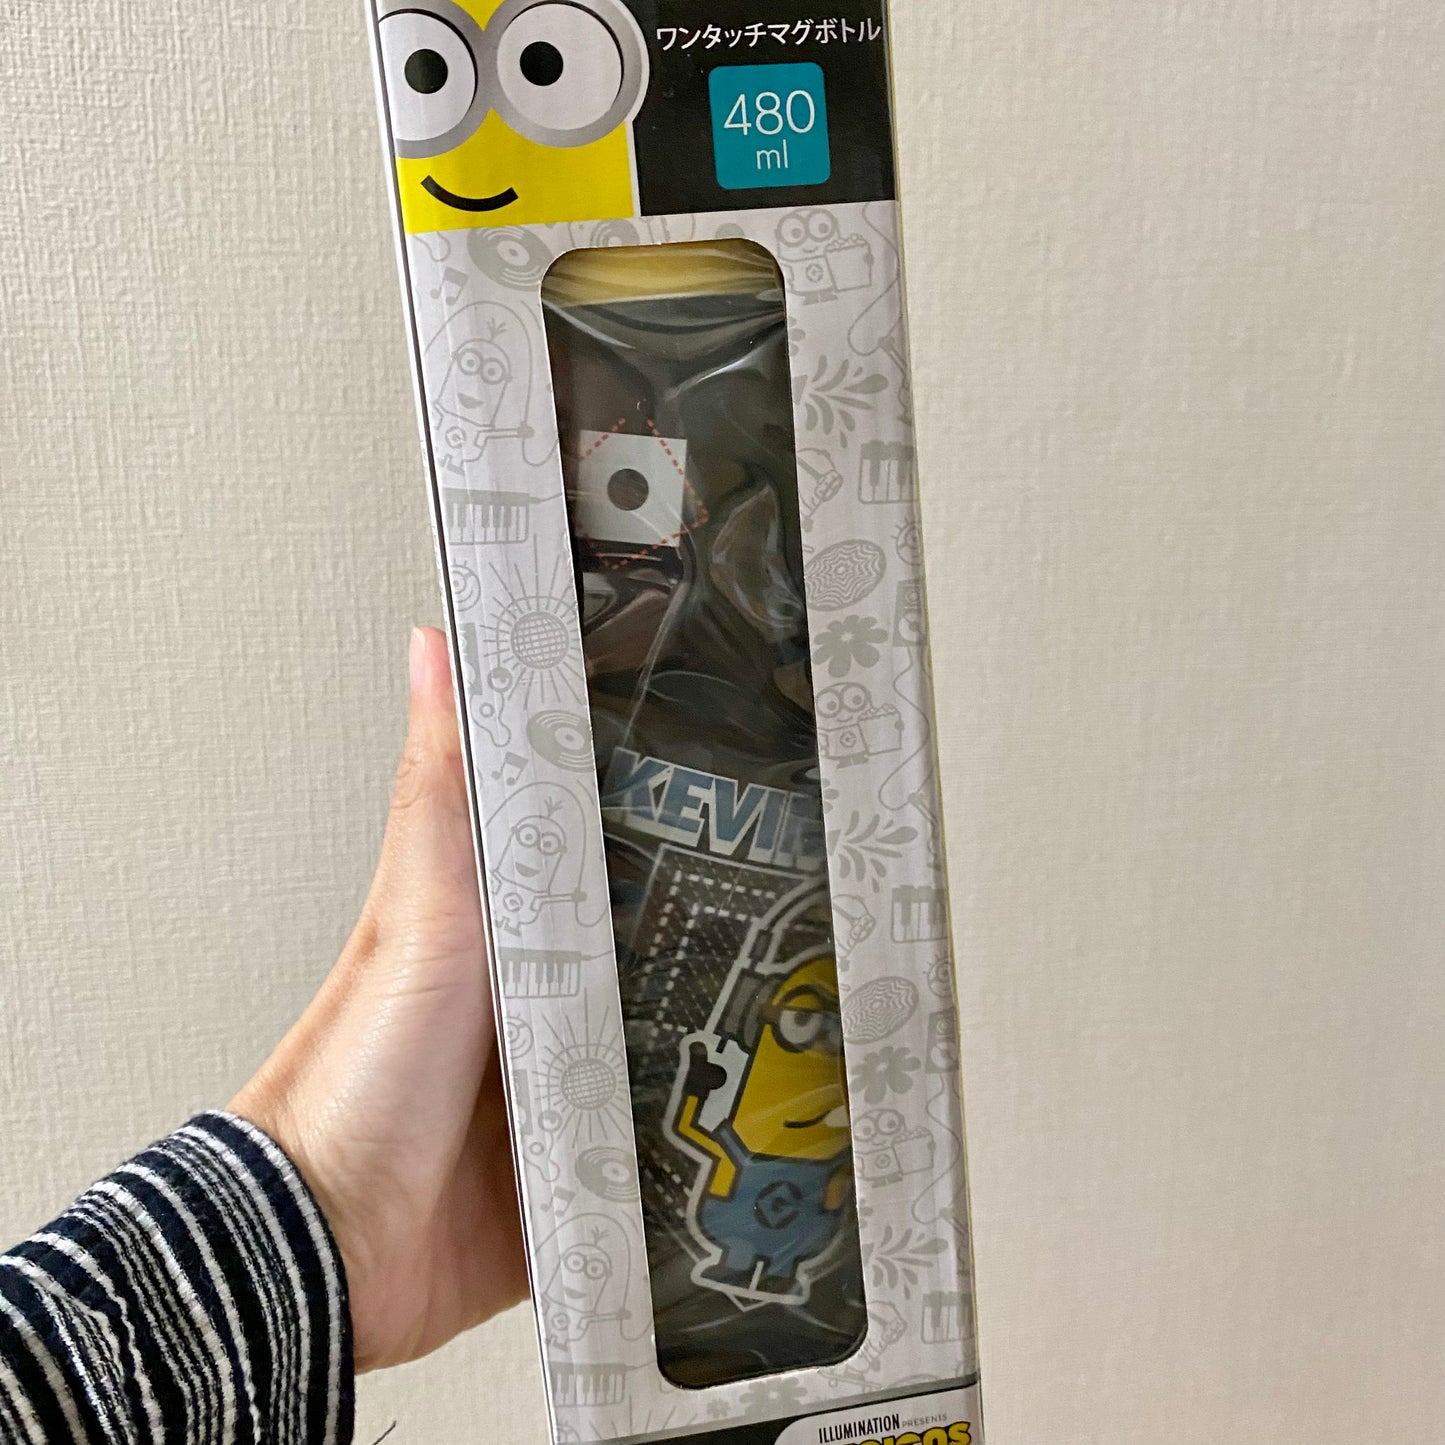 [In Stock] Minions Stainless Steel Thermos Bottle 480ml